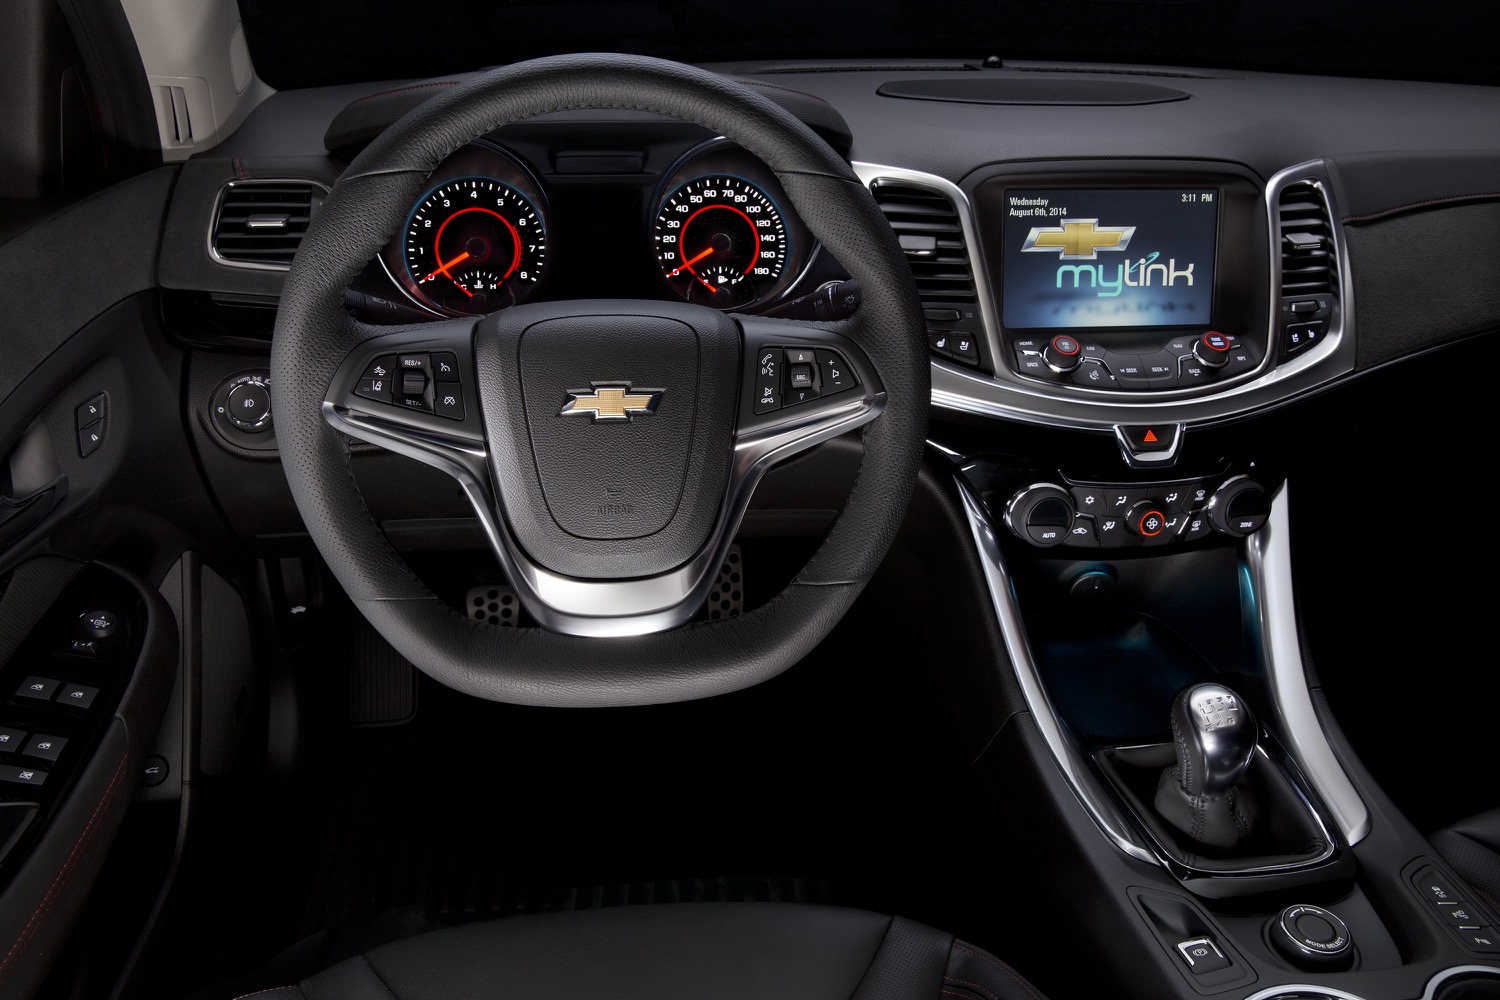 Chevy Ss Sales August 2015 United States Gm Authority